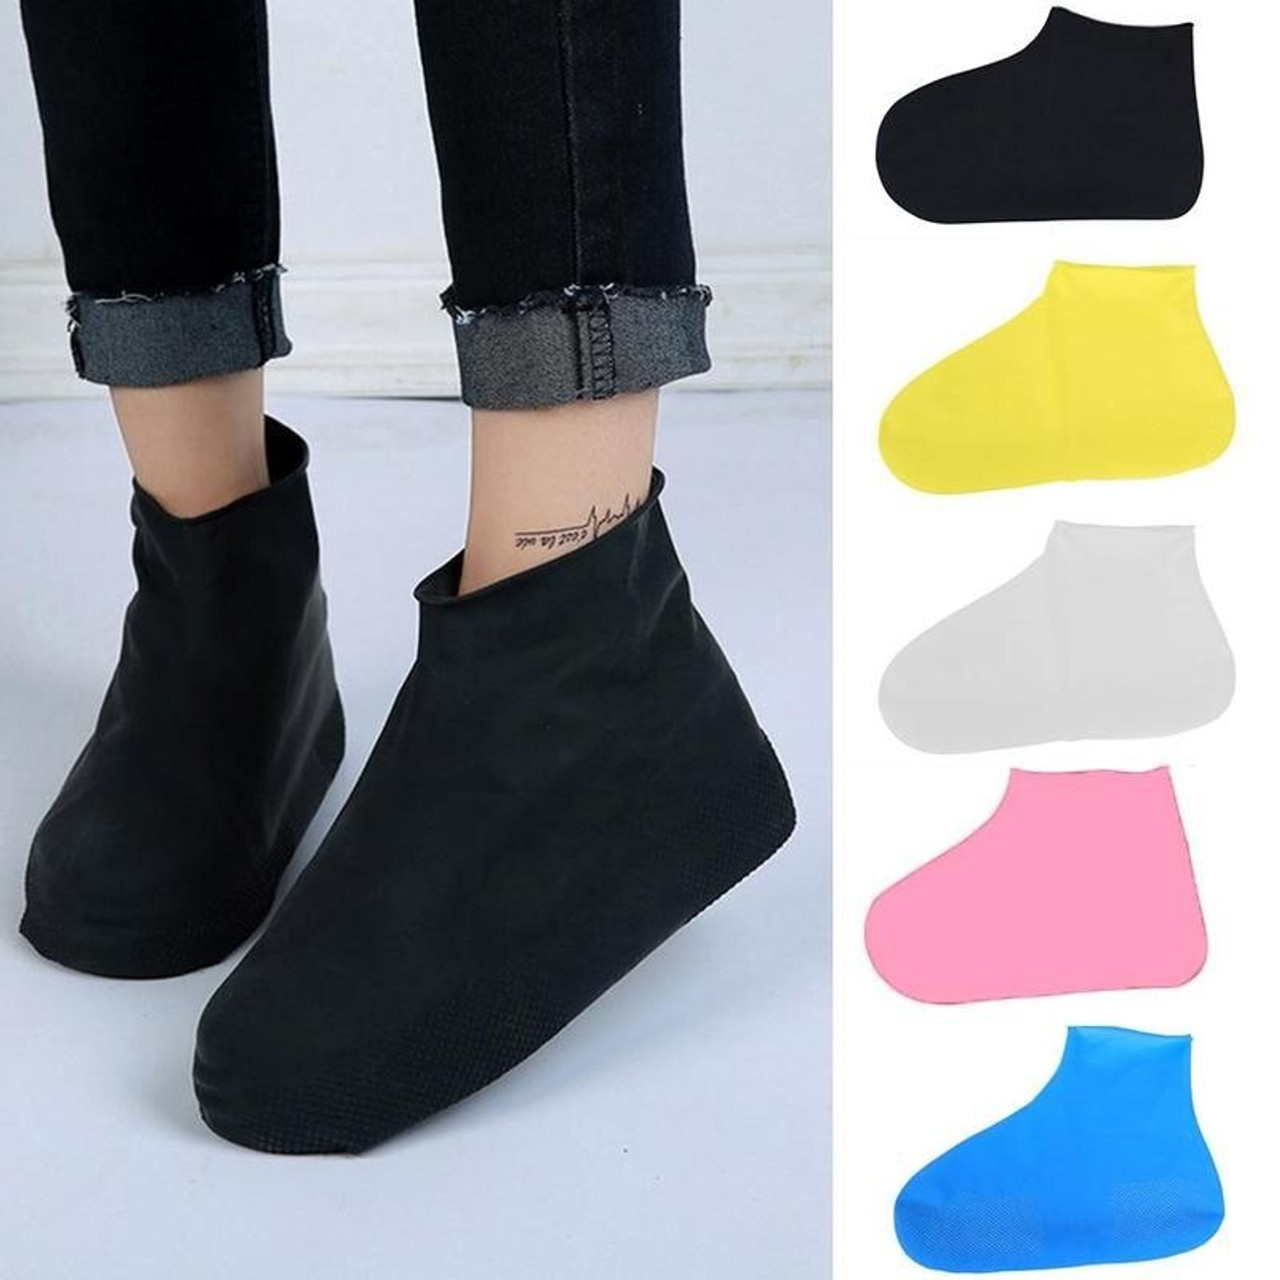 Waterproof Silicone Shoe Cover - Snatcher